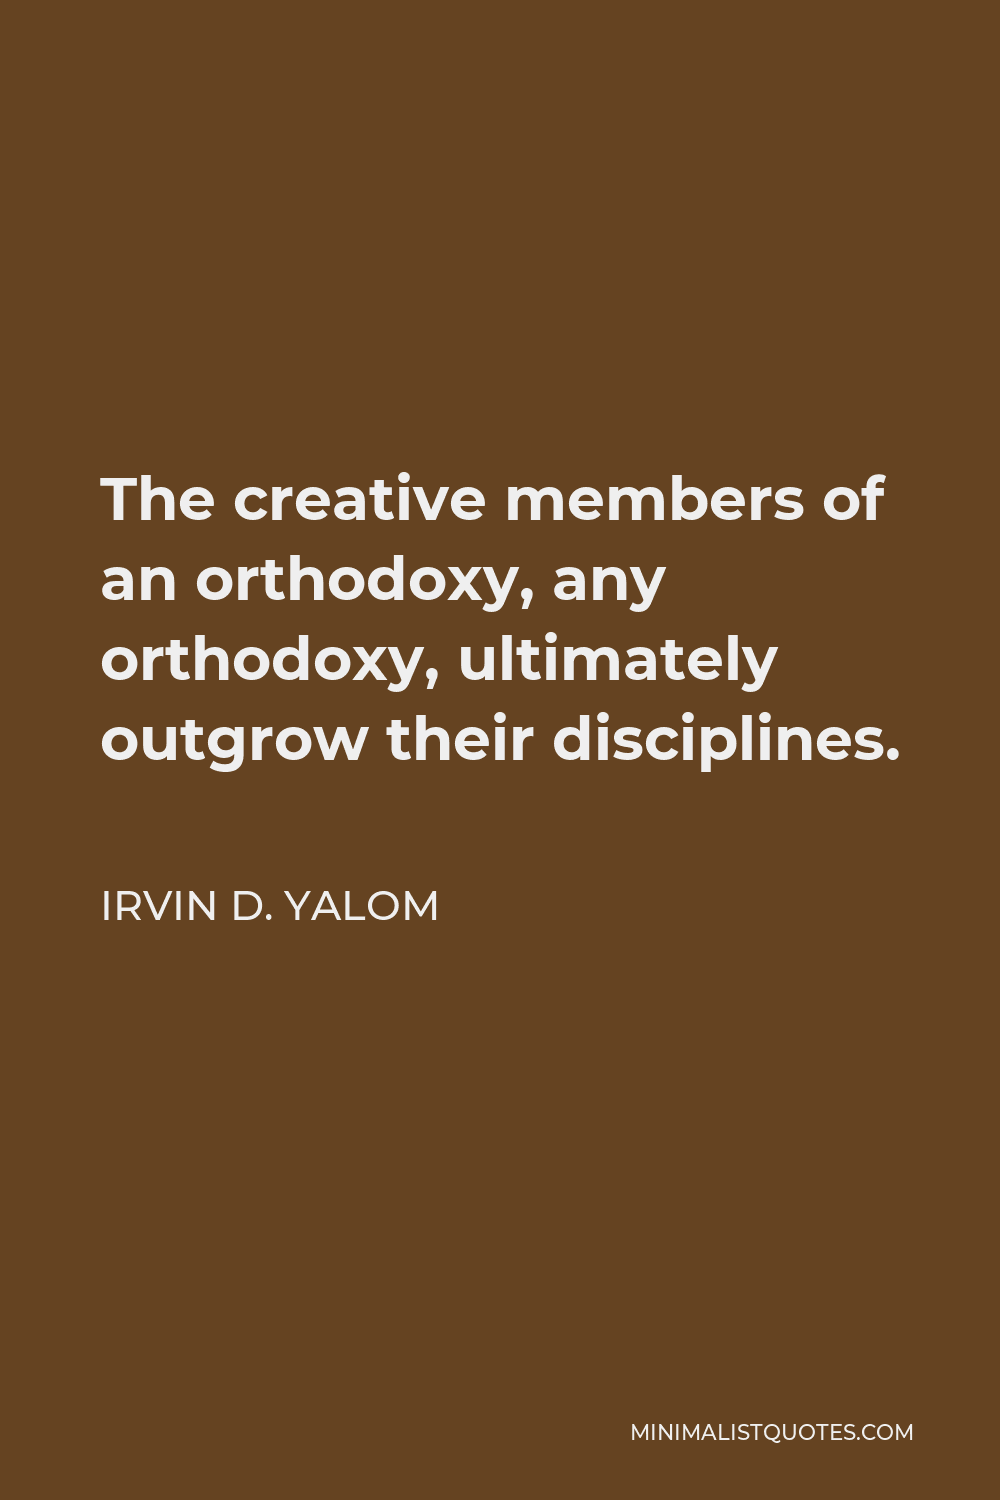 Irvin D. Yalom Quote - The creative members of an orthodoxy, any orthodoxy, ultimately outgrow their disciplines.